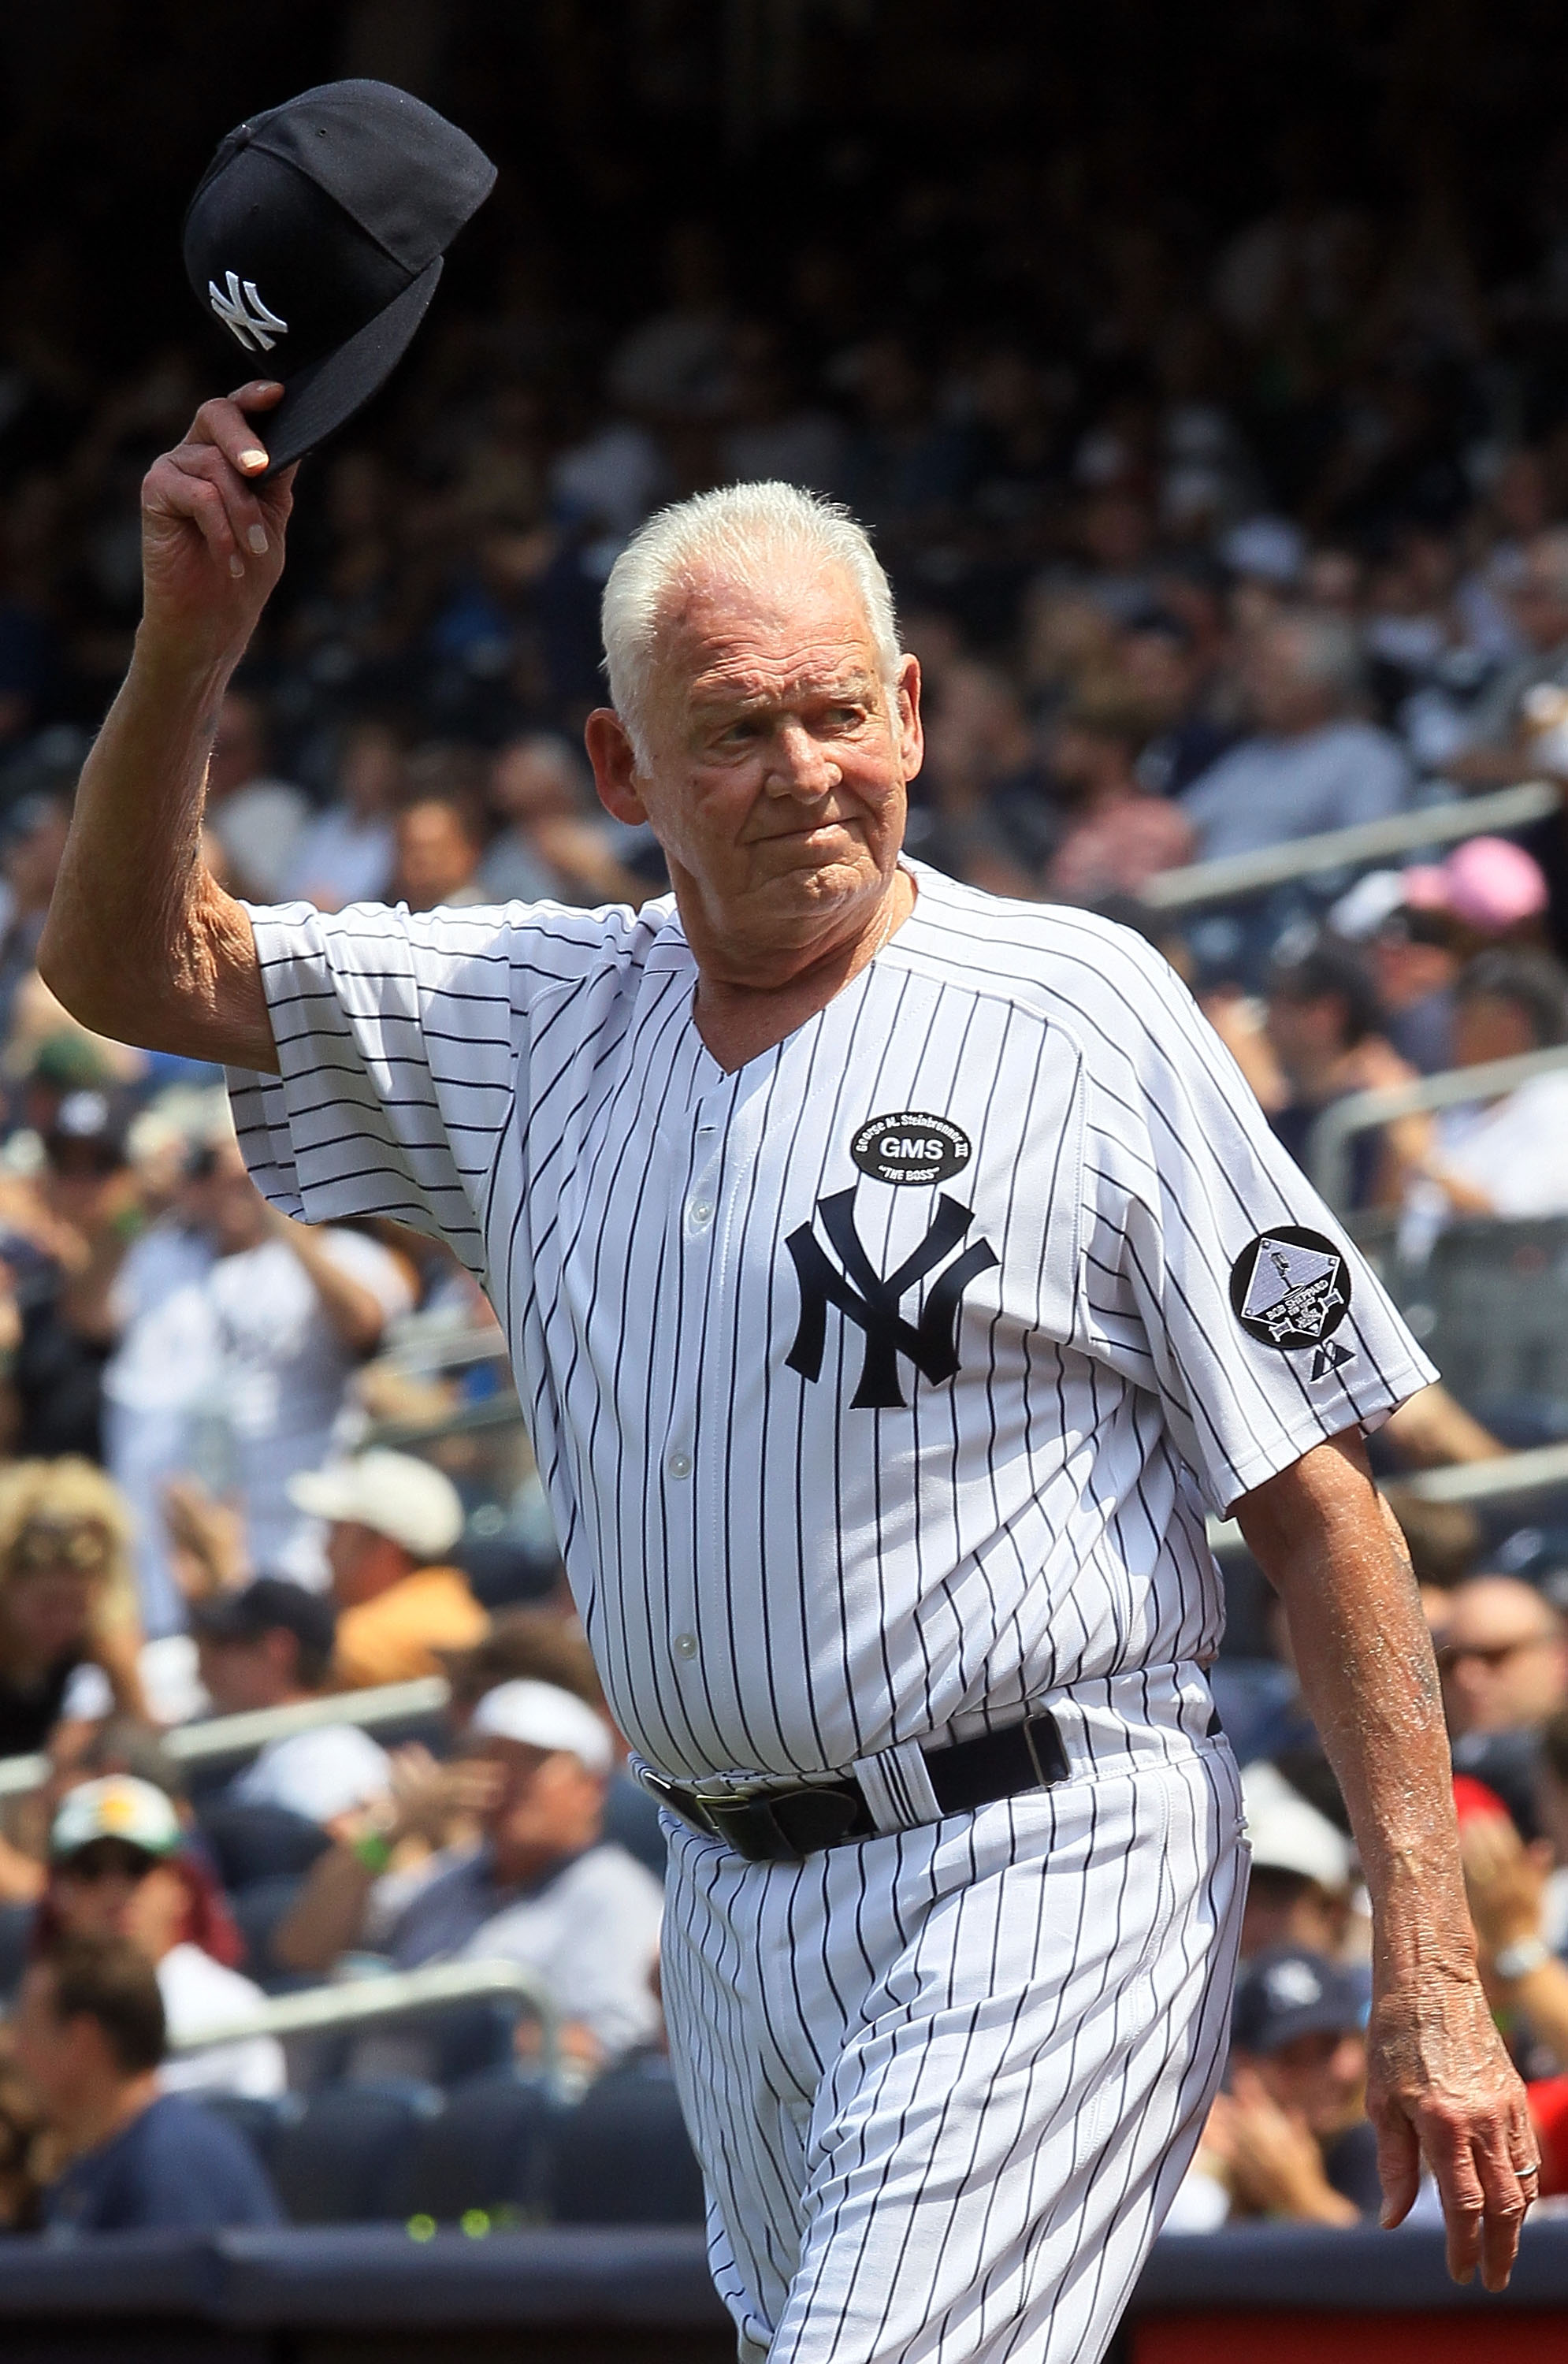 NEW YORK - JULY 17:  Former New York Yankee Don Larsen is introduced during the teams 64th Old-Timer's Day before the MLB game against the Tampa Bay Rays on July 17, 2010 at Yankee Stadium in the Bronx borough of New York City.  (Photo by Jim McIsaac/Gett